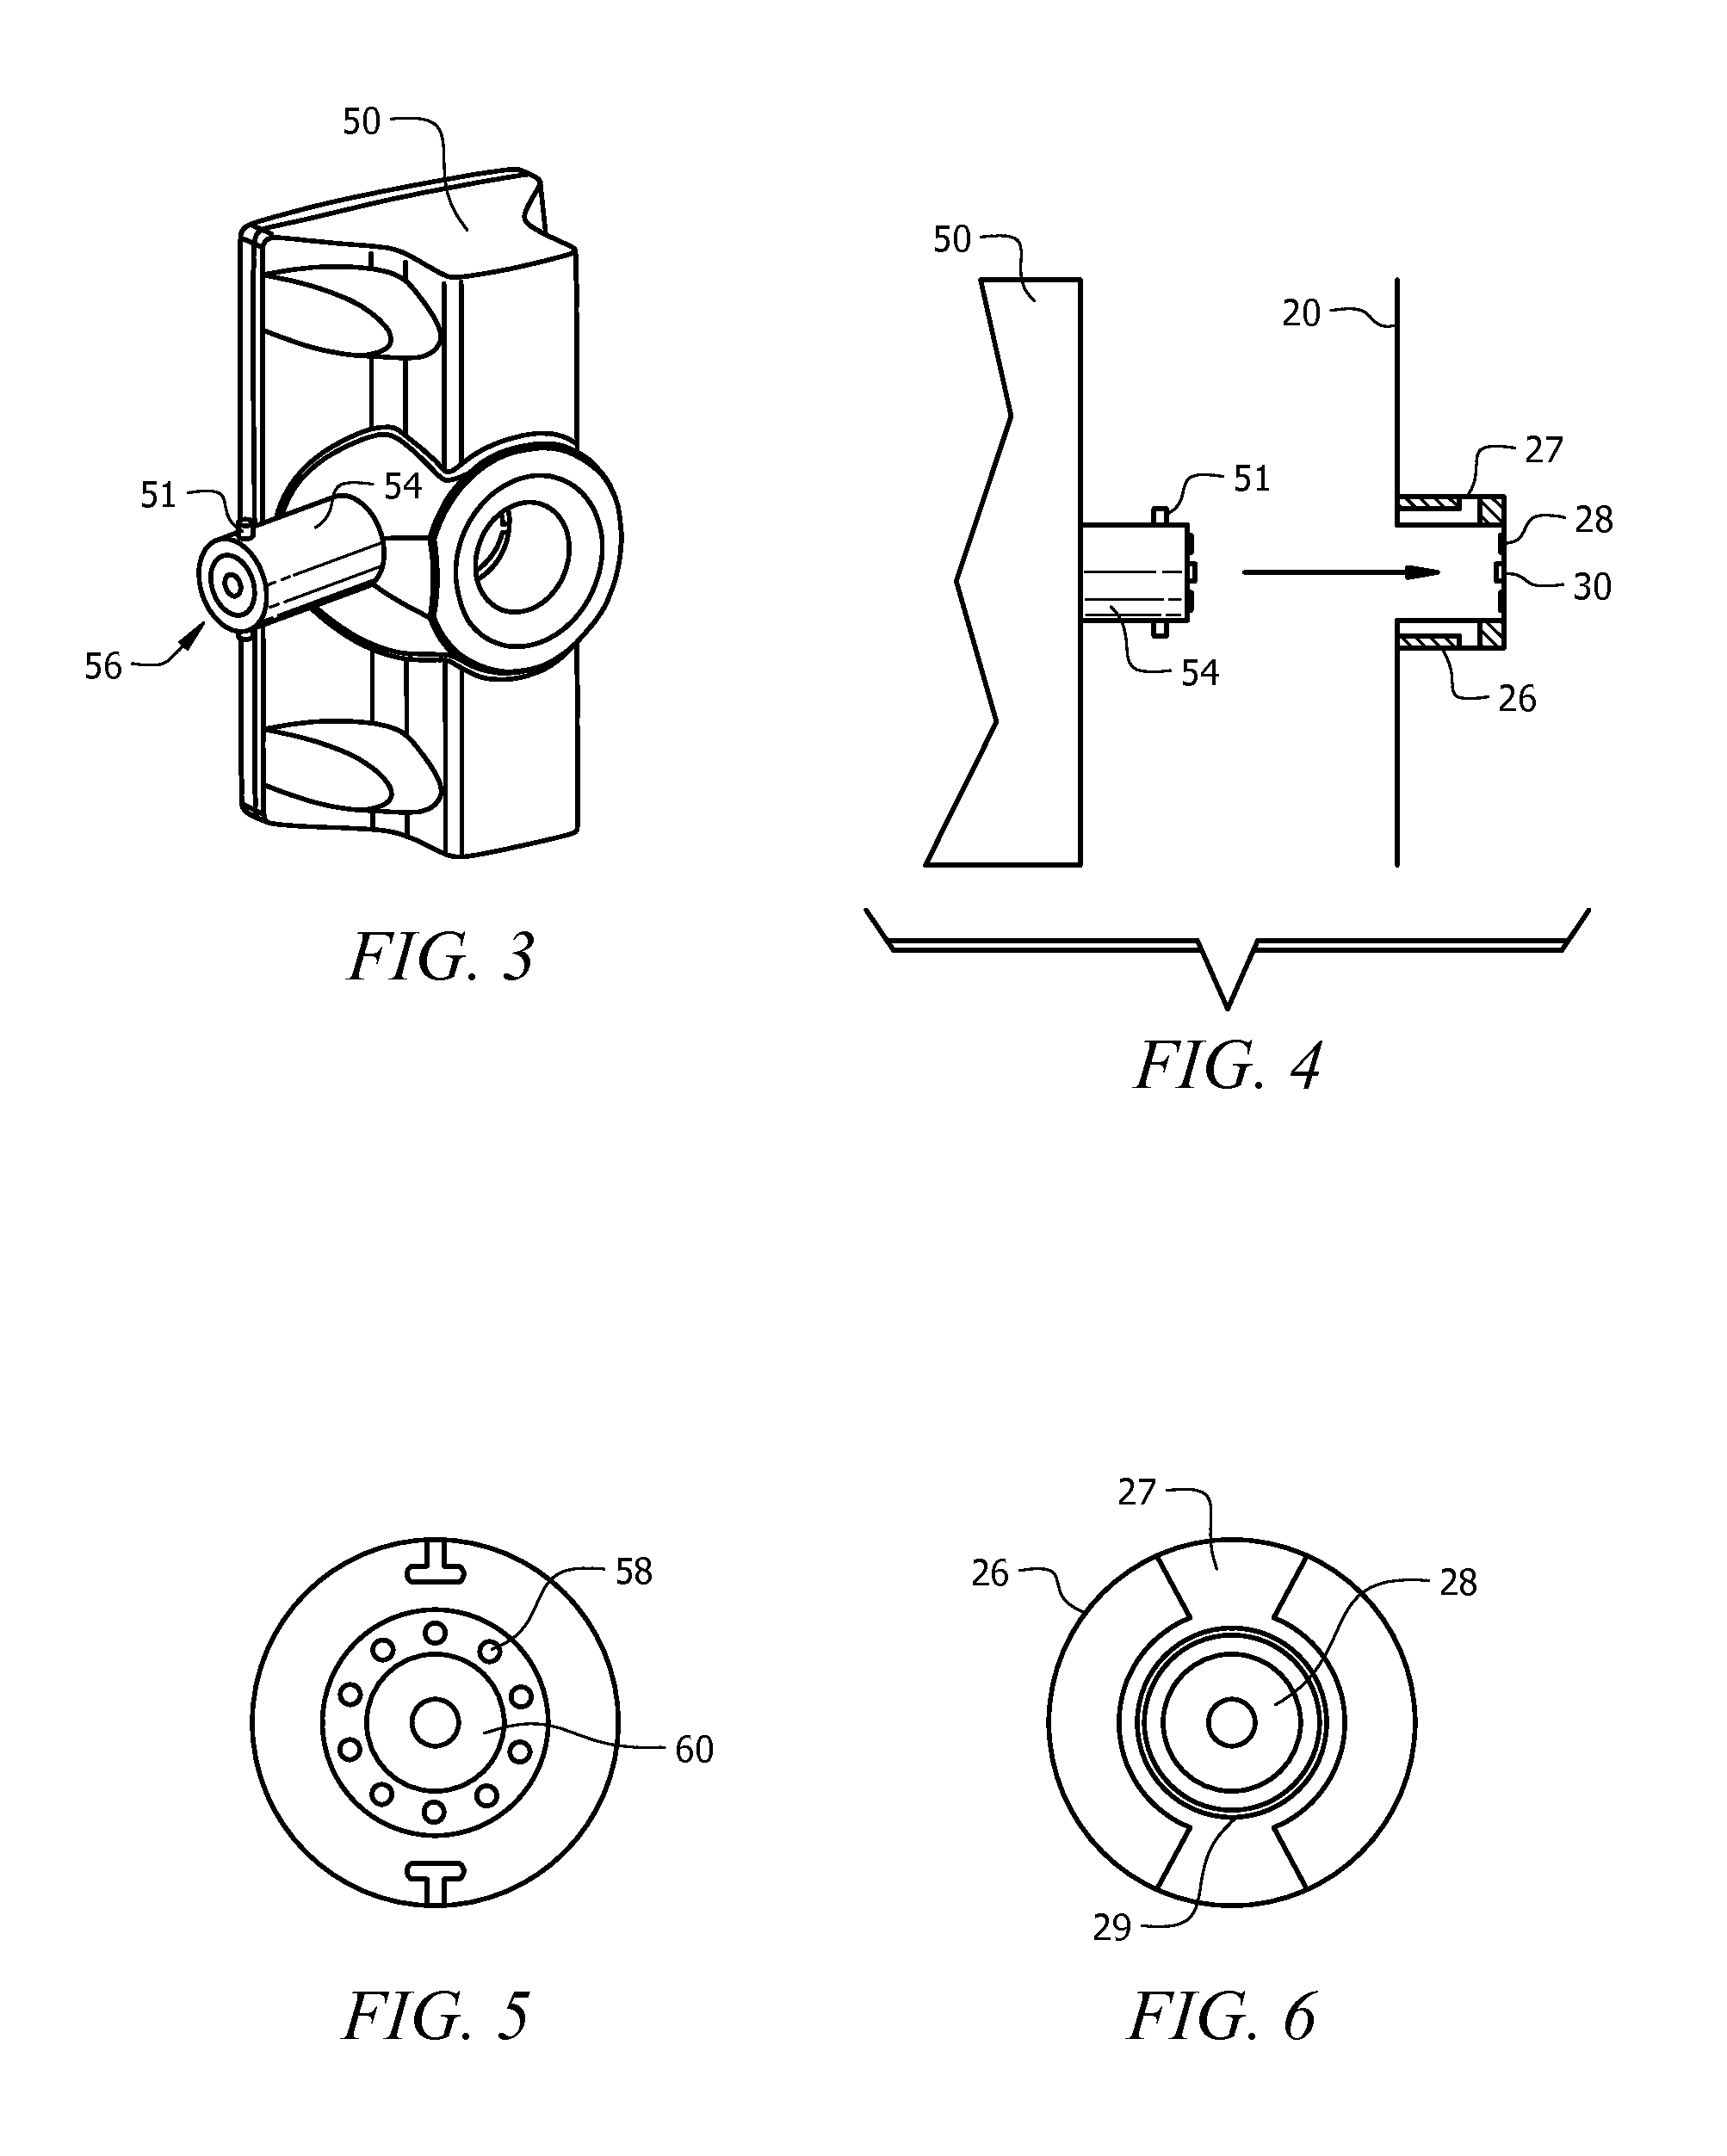 Dok Solution Patent System Method And Apparatus For Supporting And Providing Power To A Music Player